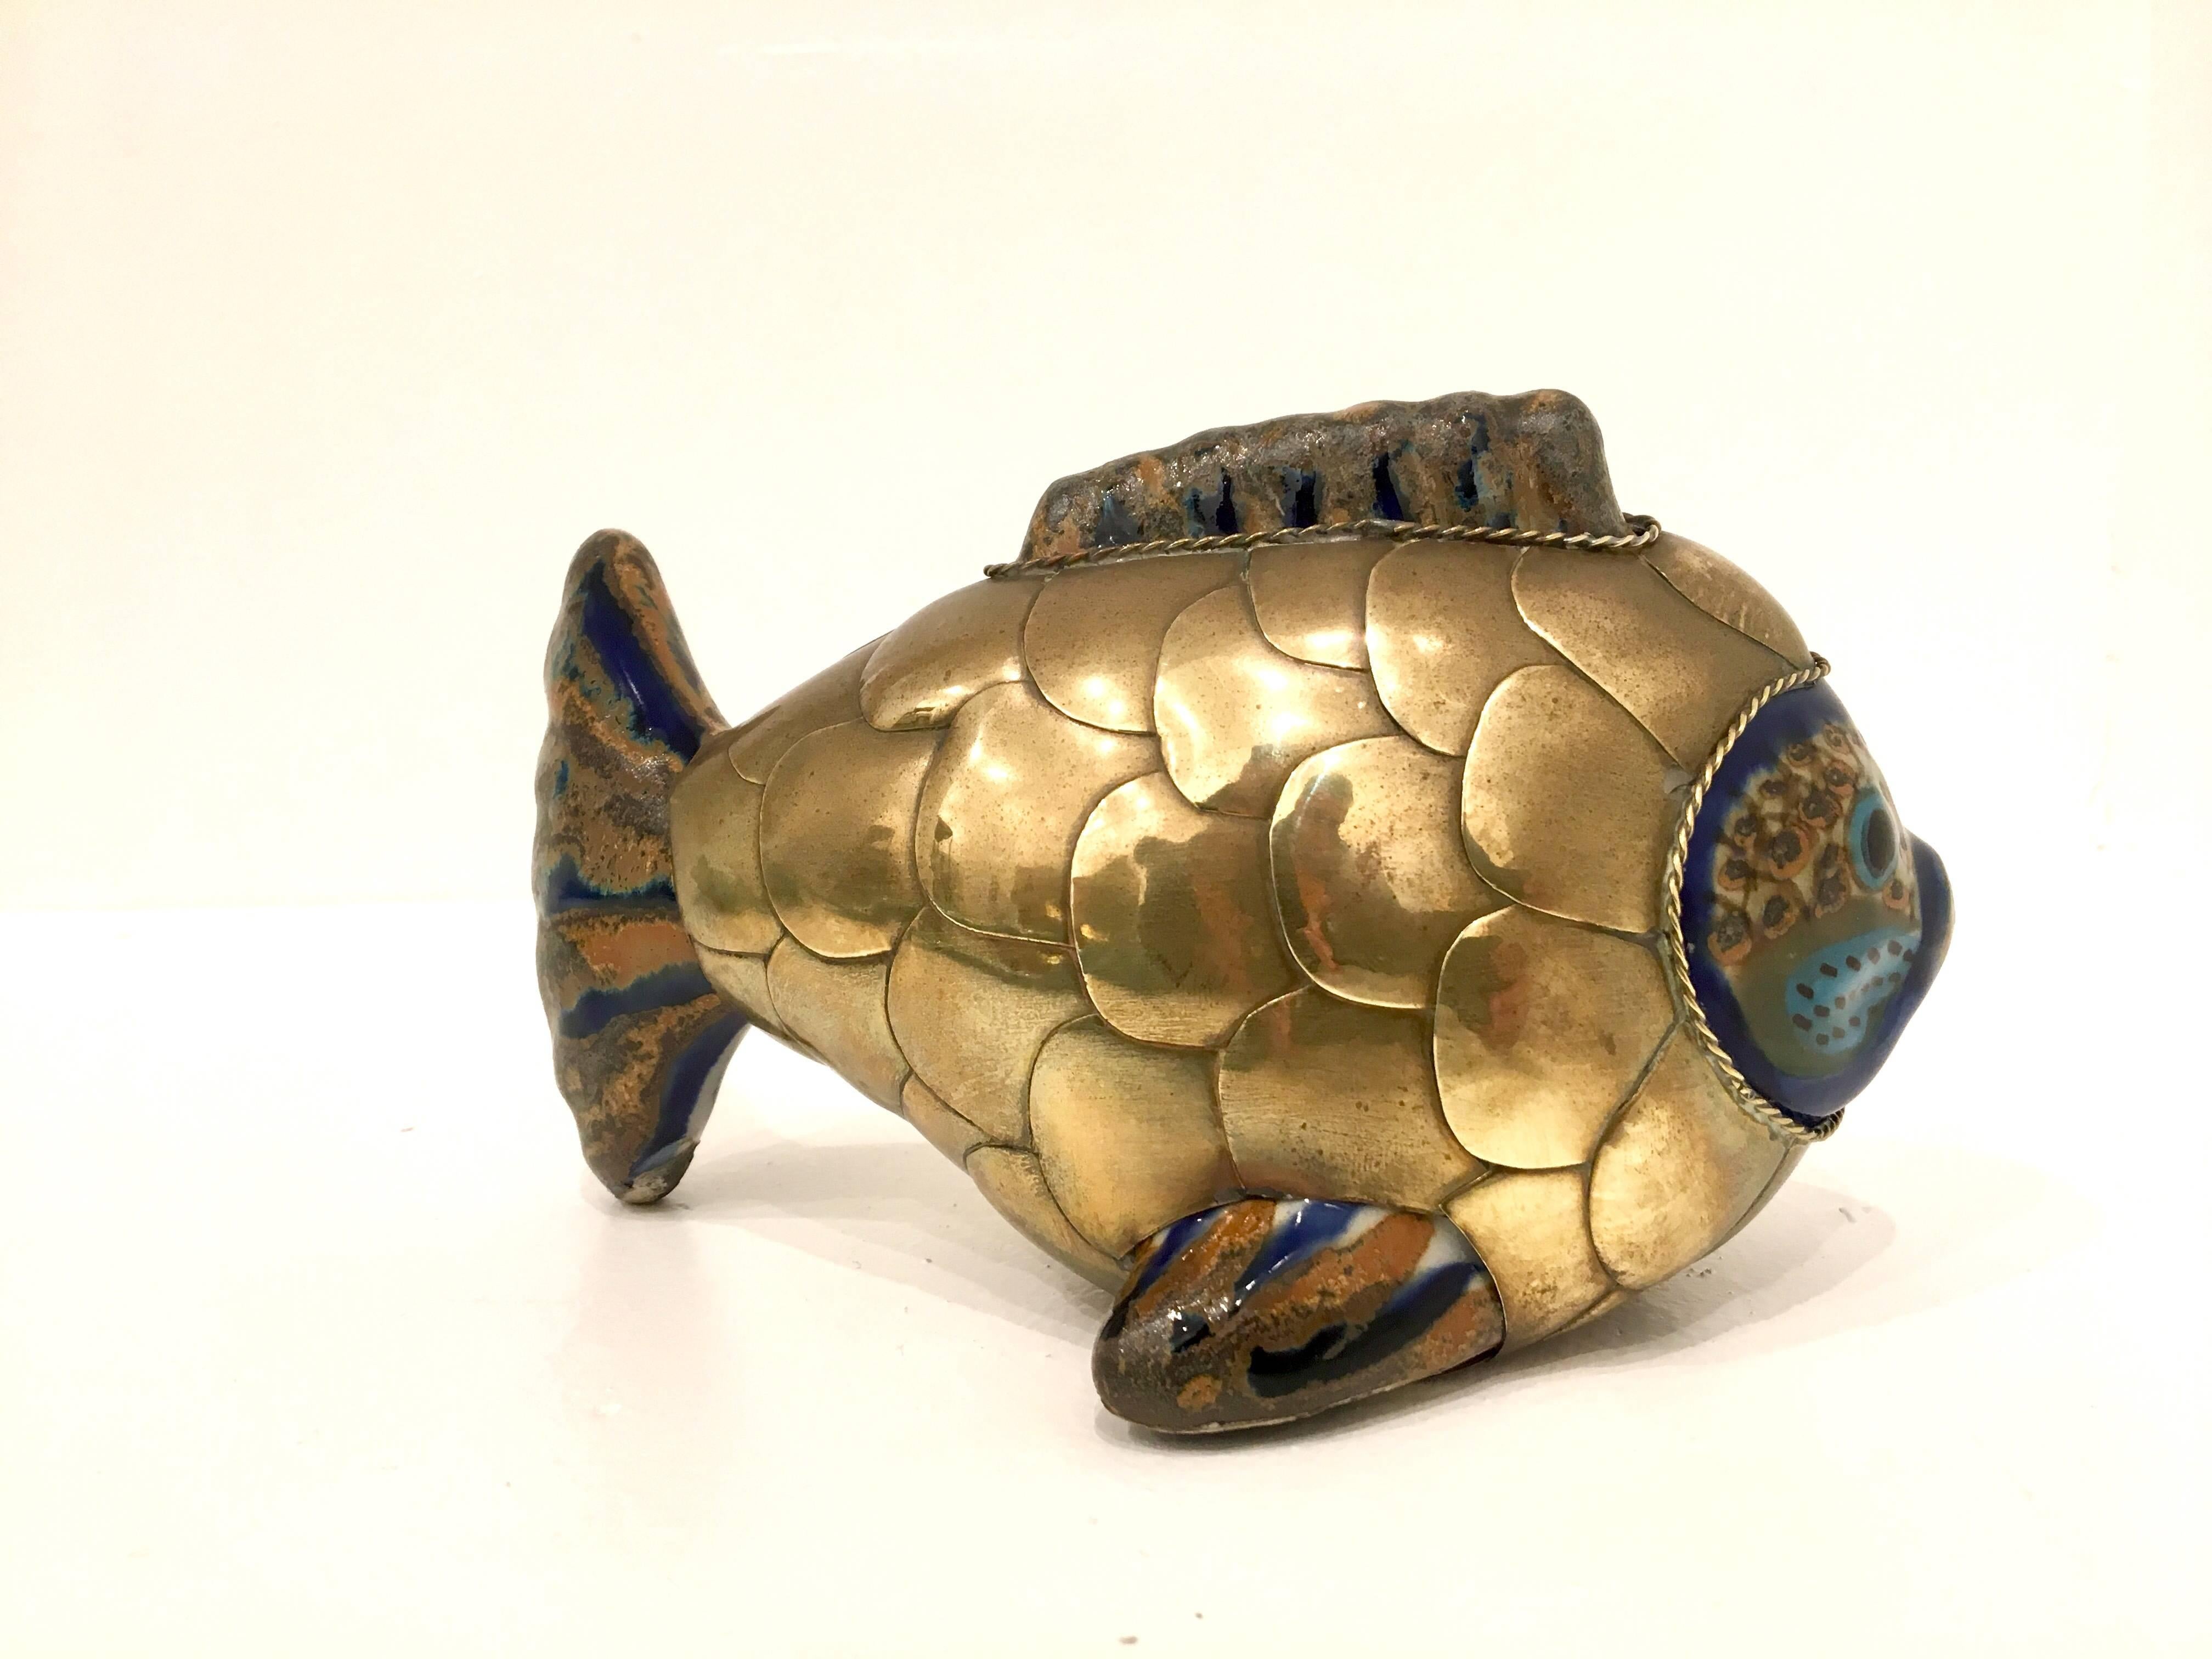 Mexican Petite Fish Sculpture in Brass and Ceramic Attributed to Sergio Bustamante